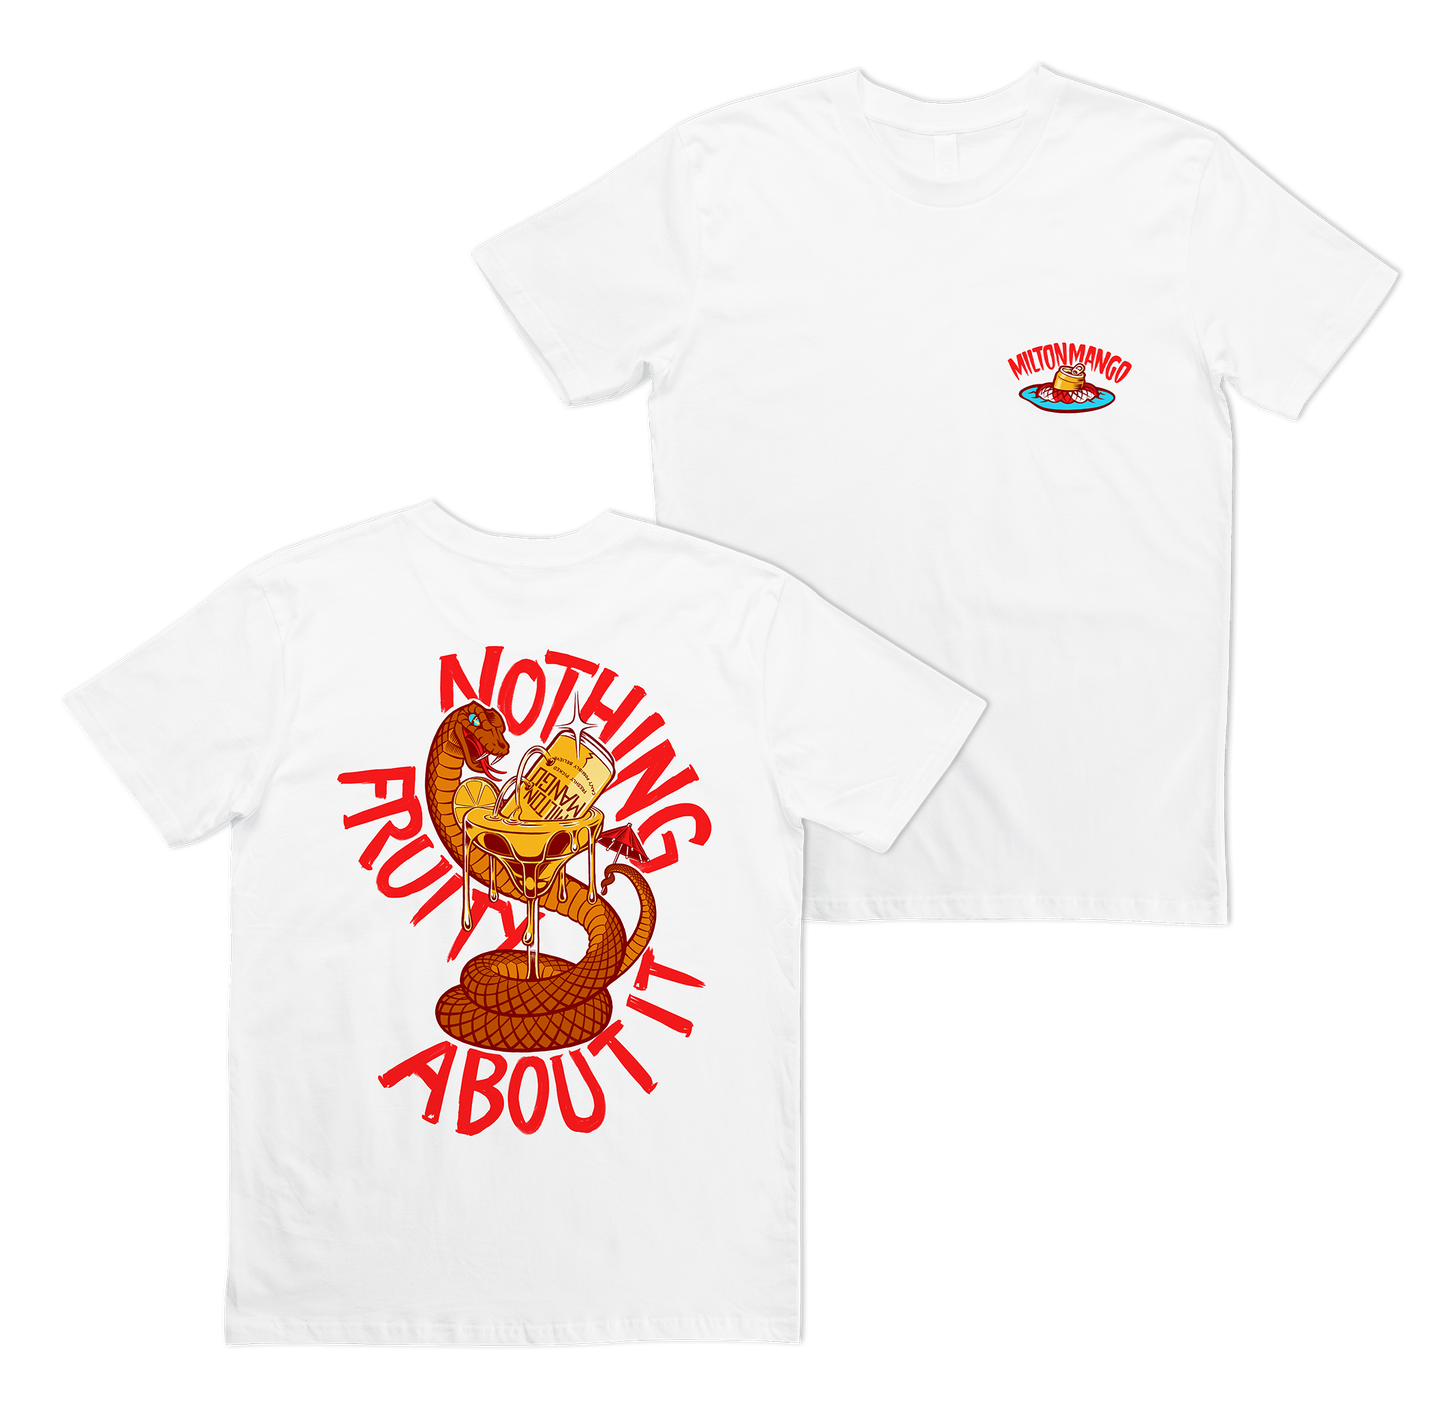 Nothin' Fruity About It Tee White